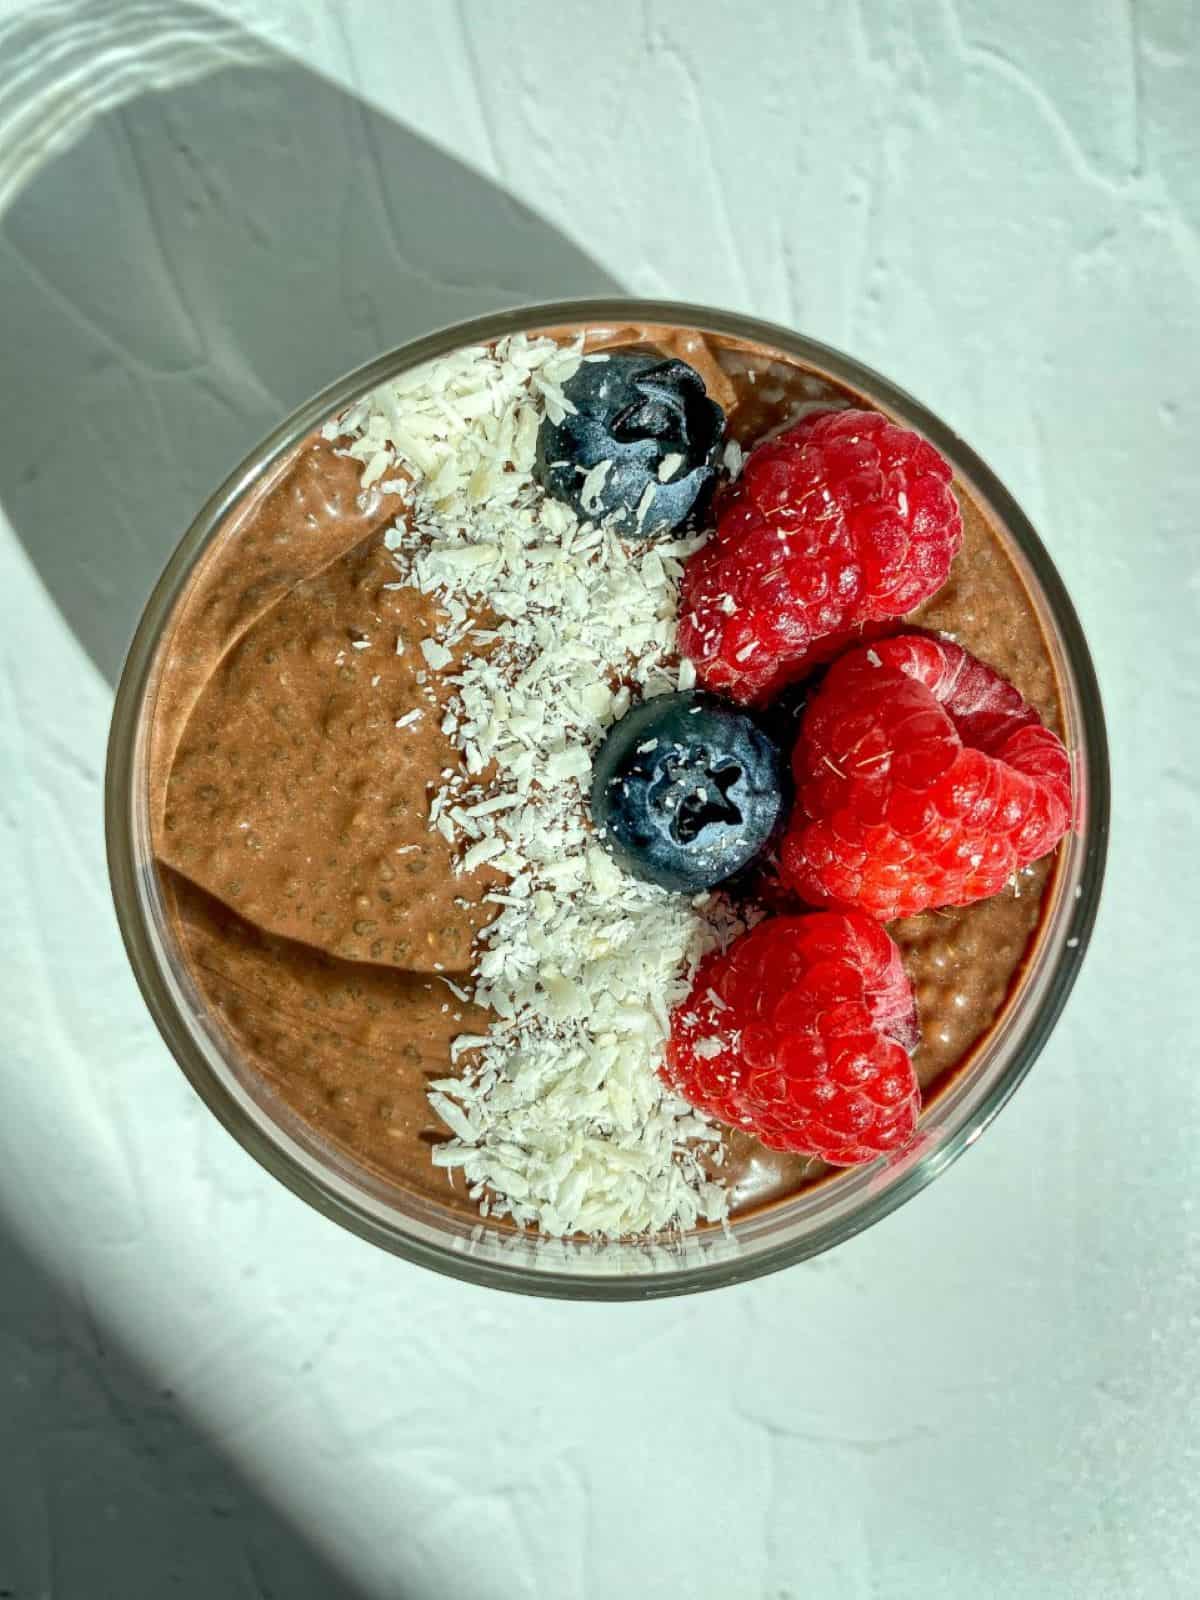 Chocolate Chia Seed Pudding in a bowl with fresh berries and shredded coconut flakes.